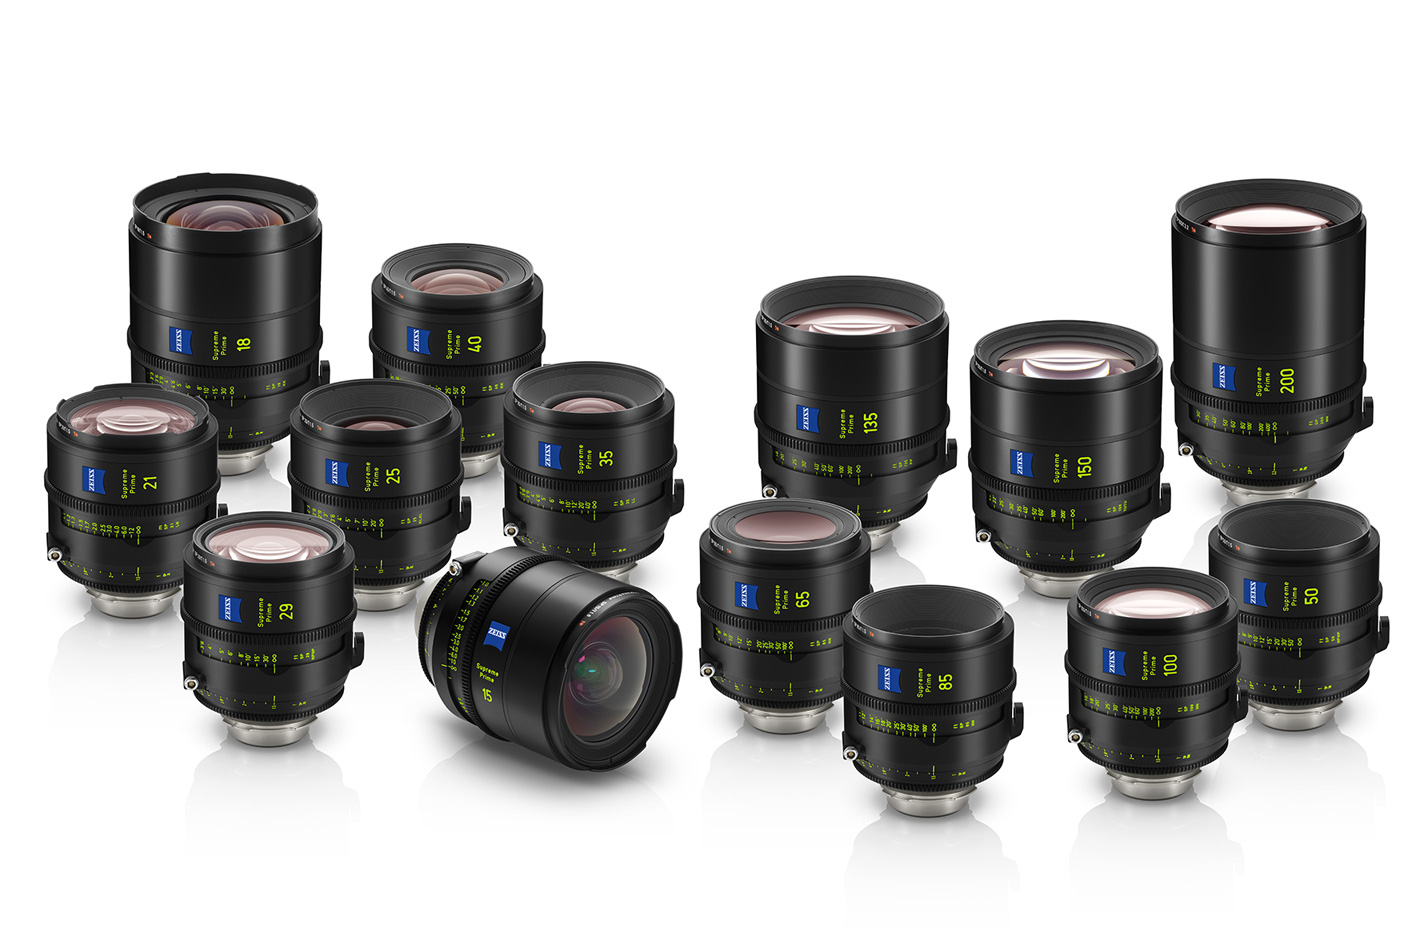 New ZEISS Supreme Prime 15mm T1.8 completes the series